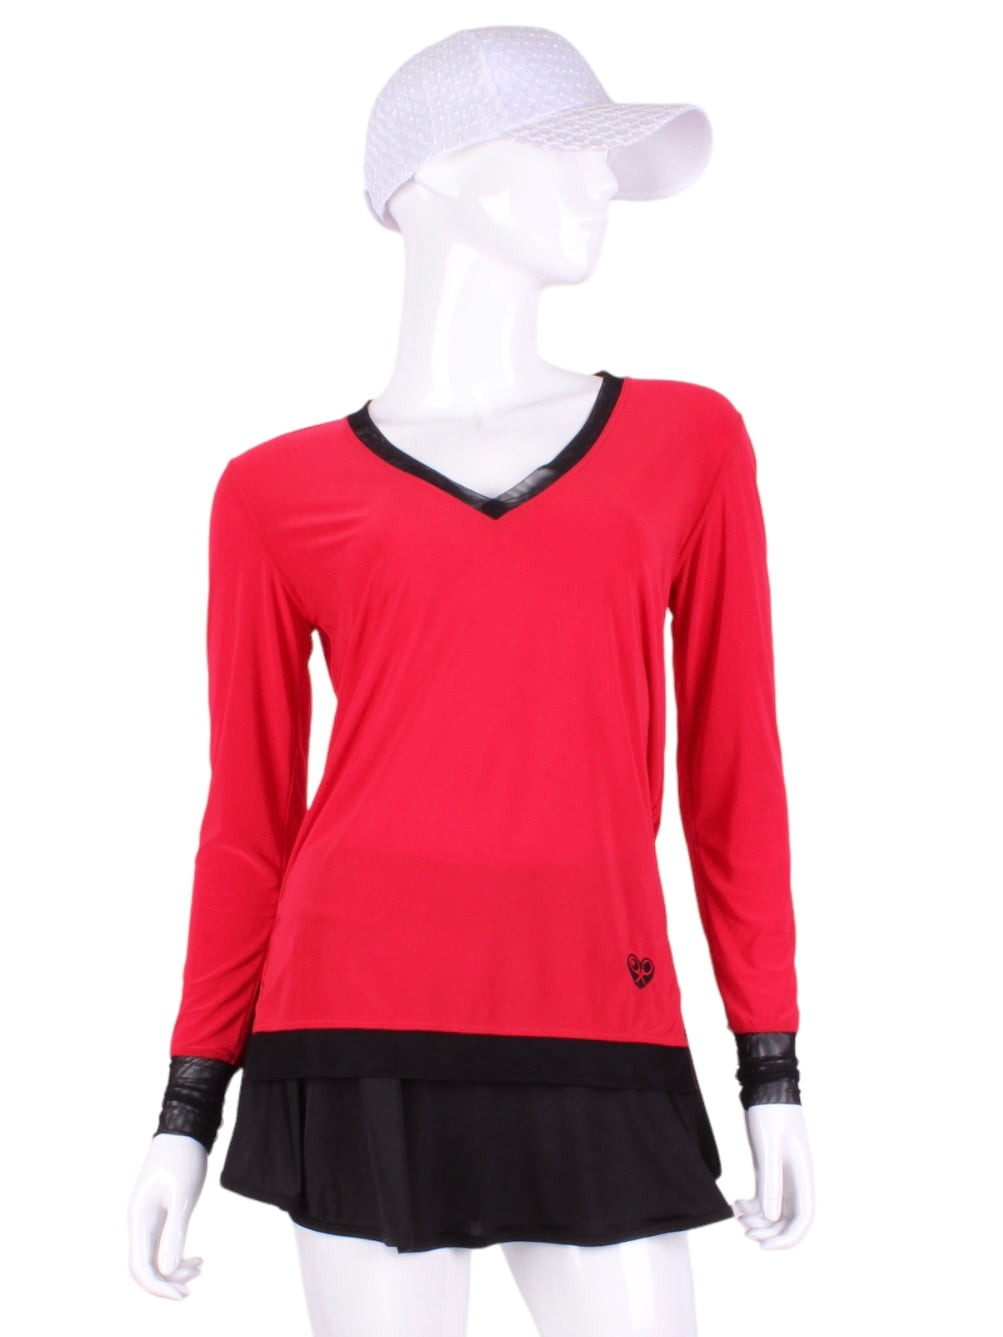 Bright Red Long Sleeve Very Vee Tee w/ Black Mesh. This top is soooo gorgeous!  The collar and cuffs are accented with feminine mesh and the body is flowy and soft.  It’s called the Long Sleeve Very Vee Tee - because as you can see - the Vee is - well you know - VERY VEE!  For the tennis lady who loves to leave her chest open - but cover her arms (and other bits) this top is seductive in a sweet way!  You feel nearly naked in it.  So go ahead - hit that ace!  Flattering and free - that’s what this top is.